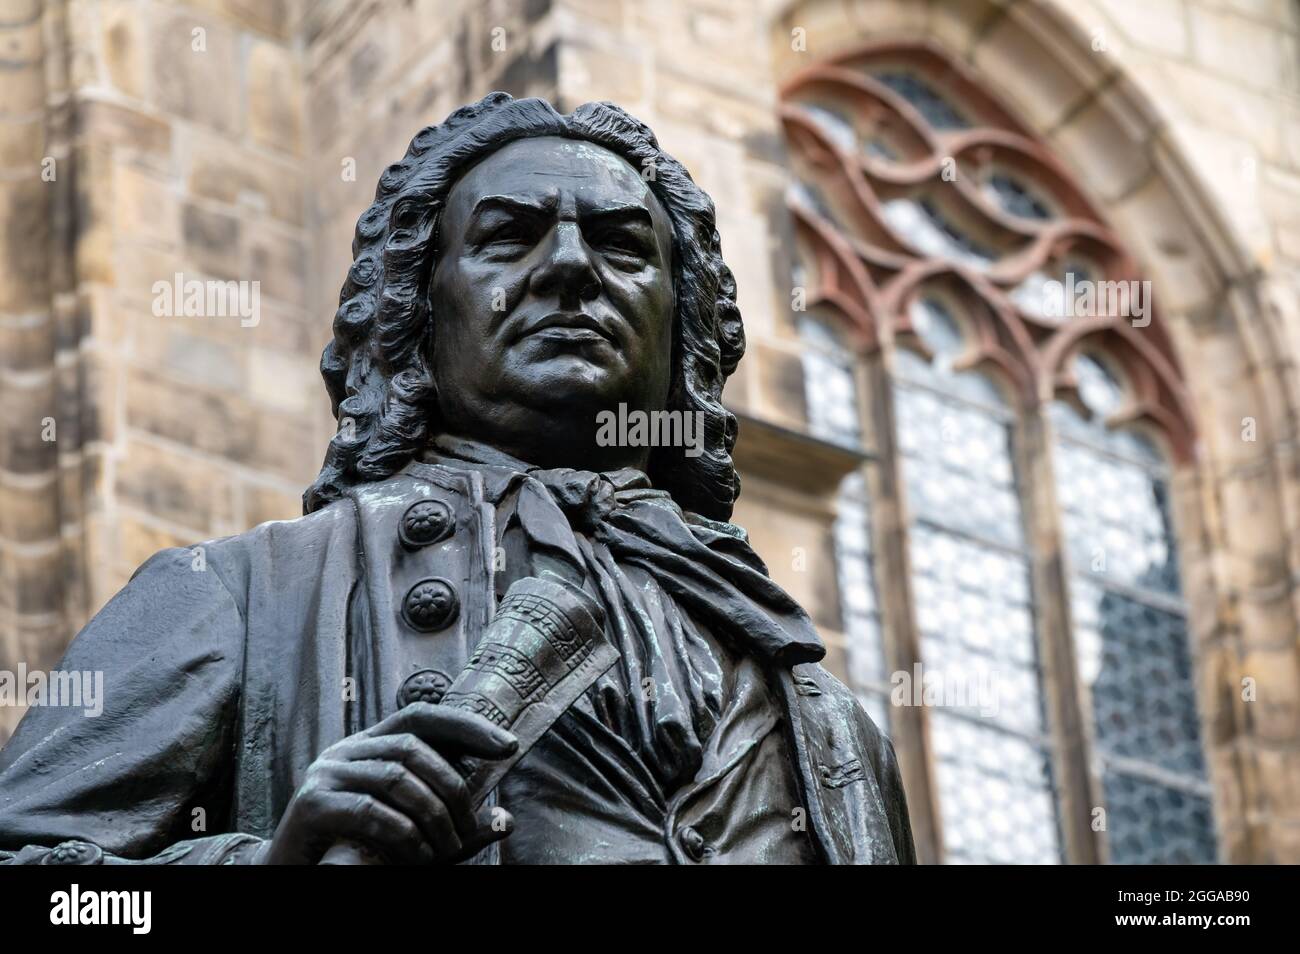 Monument to the Thomaskantor and composer Johann Sebastian Bach in front of the Thomaskirche in Leipzig Stock Photo